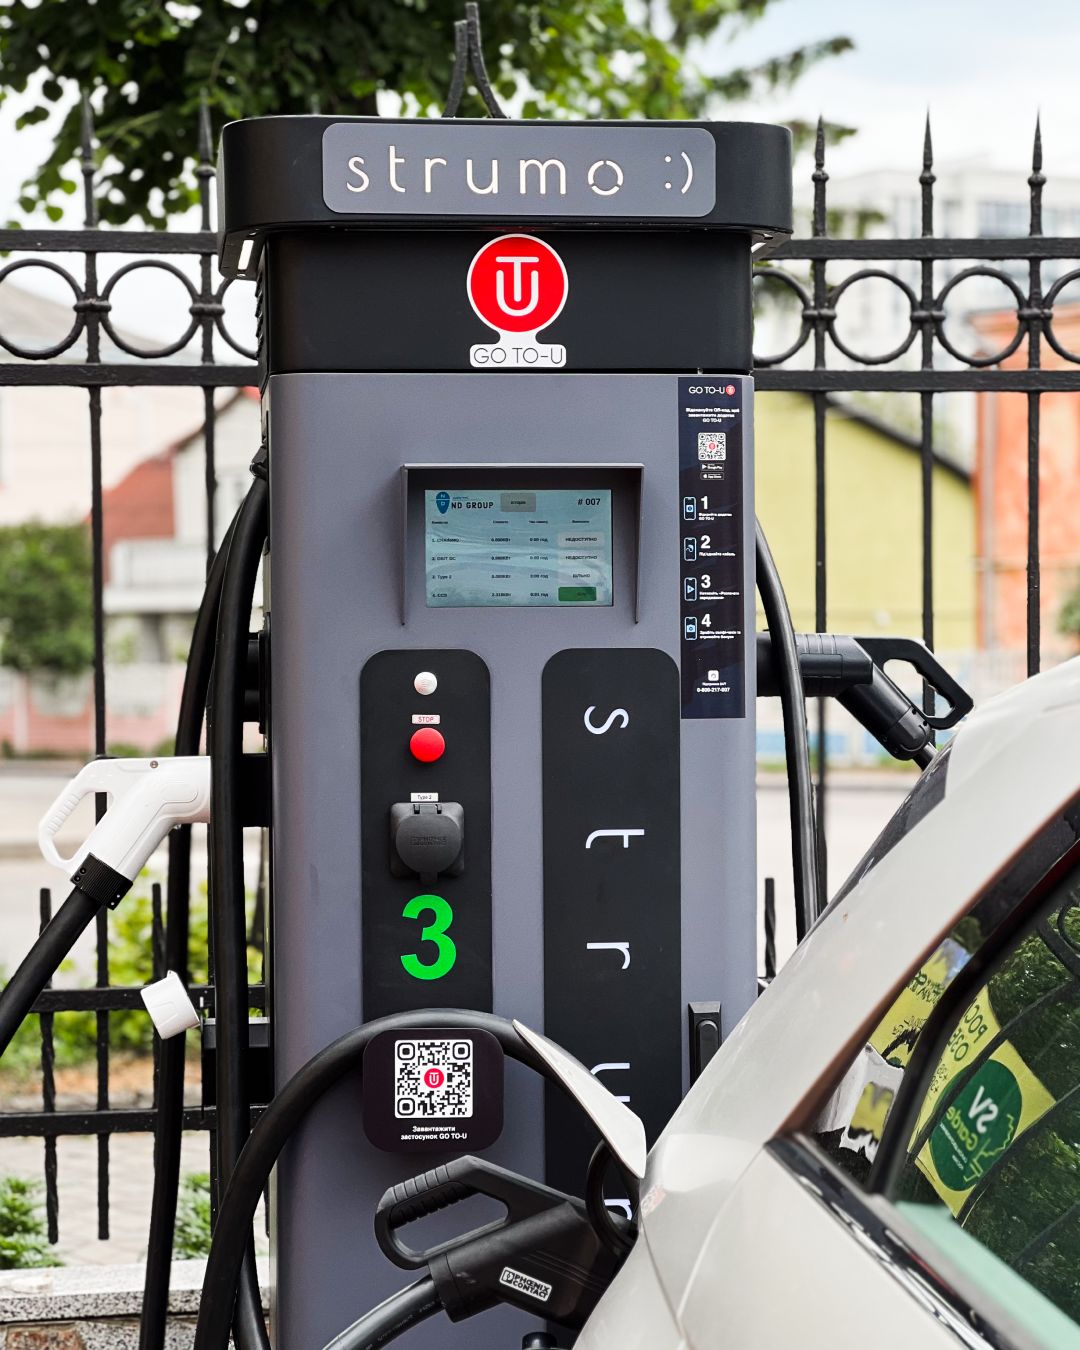 We're thrilled to share a new exciting location where EV drivers can enjoy seamless charging experience with our advanced reservation technology